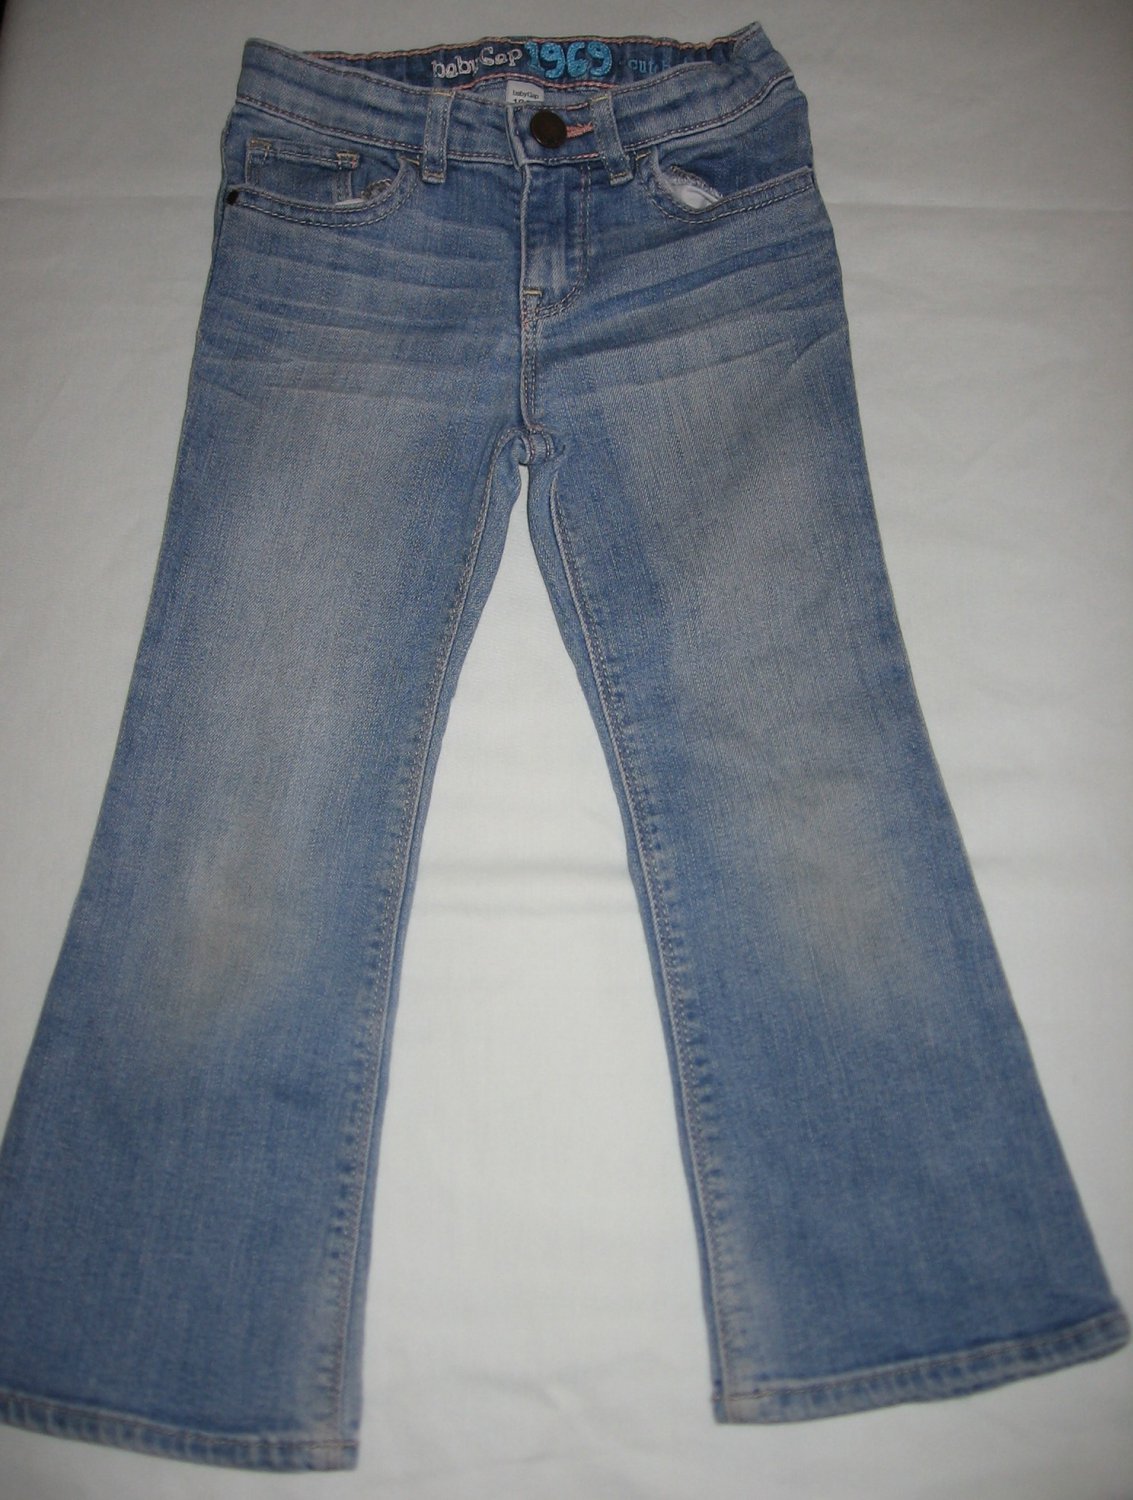 Baby Gap 1969 Jeans Cute Boot Pants Adjustable Waist Size 4 Years